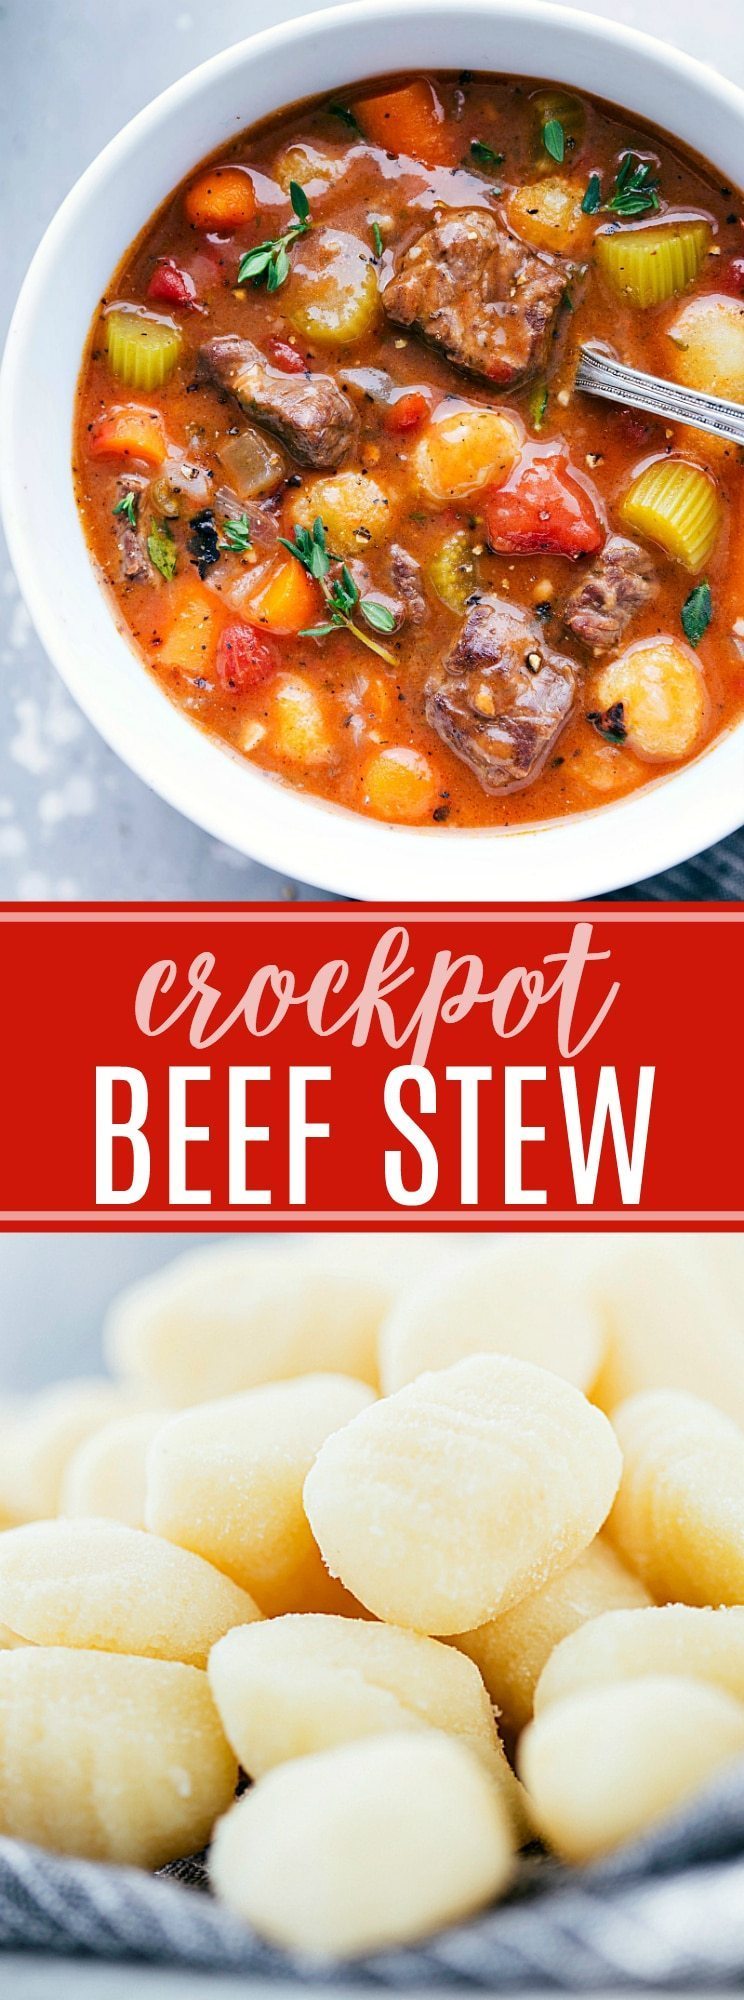 The ultimate BEST EVER crockpot beef stew with gnocchi! Recipe via chelseasmessyapron.com | #beef #stew #crockpot #slowcooker #gnocchi #best #dinner #soup #easy #delicious #familyfriendly #carrots #celery